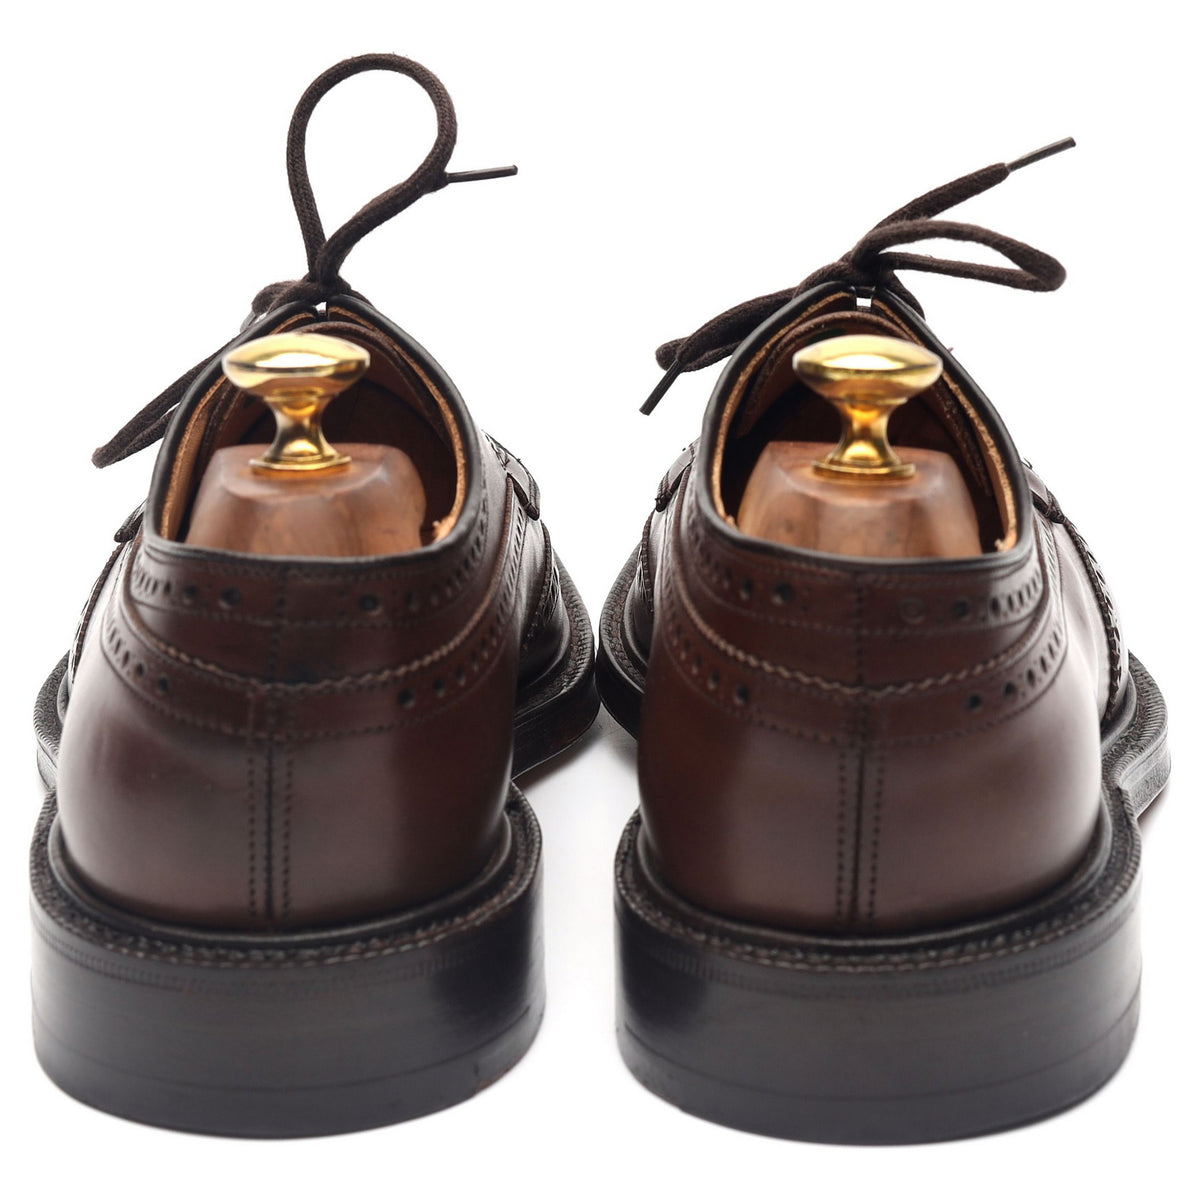 &#39;Grafton&#39; Brown Leather Derby Brogues UK 7.5 G